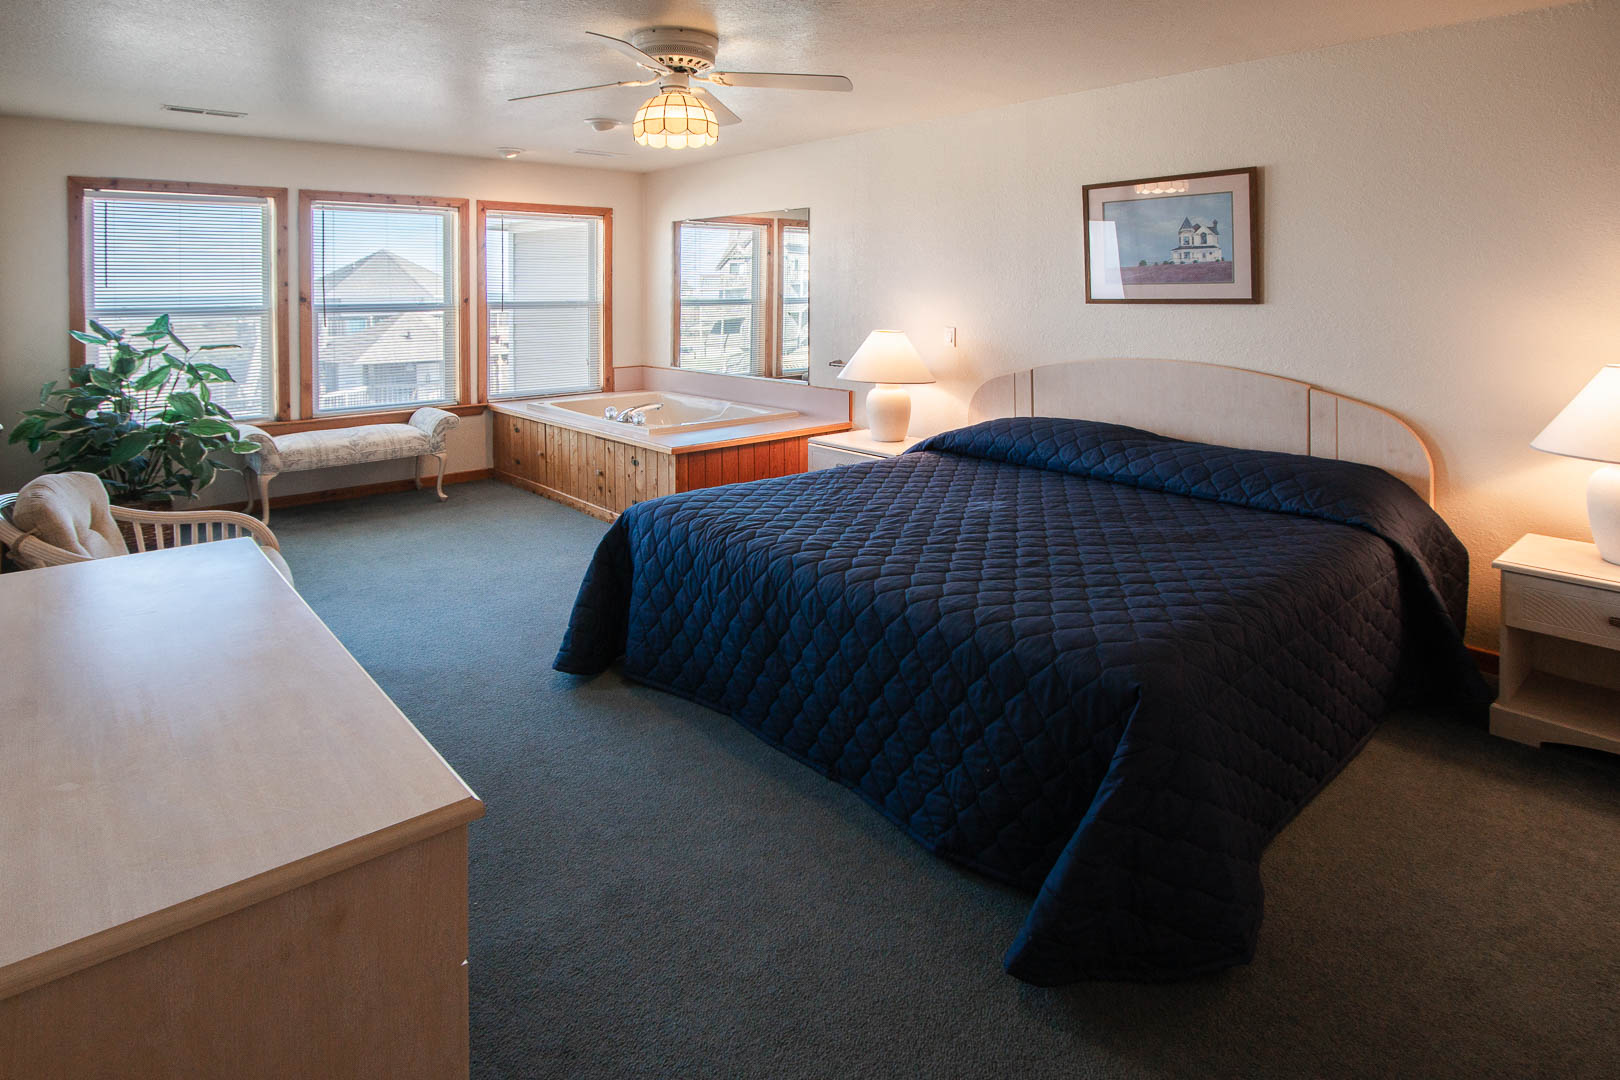 A spacious master bedroom at VRI's Barrier Island Station in North Carolina.